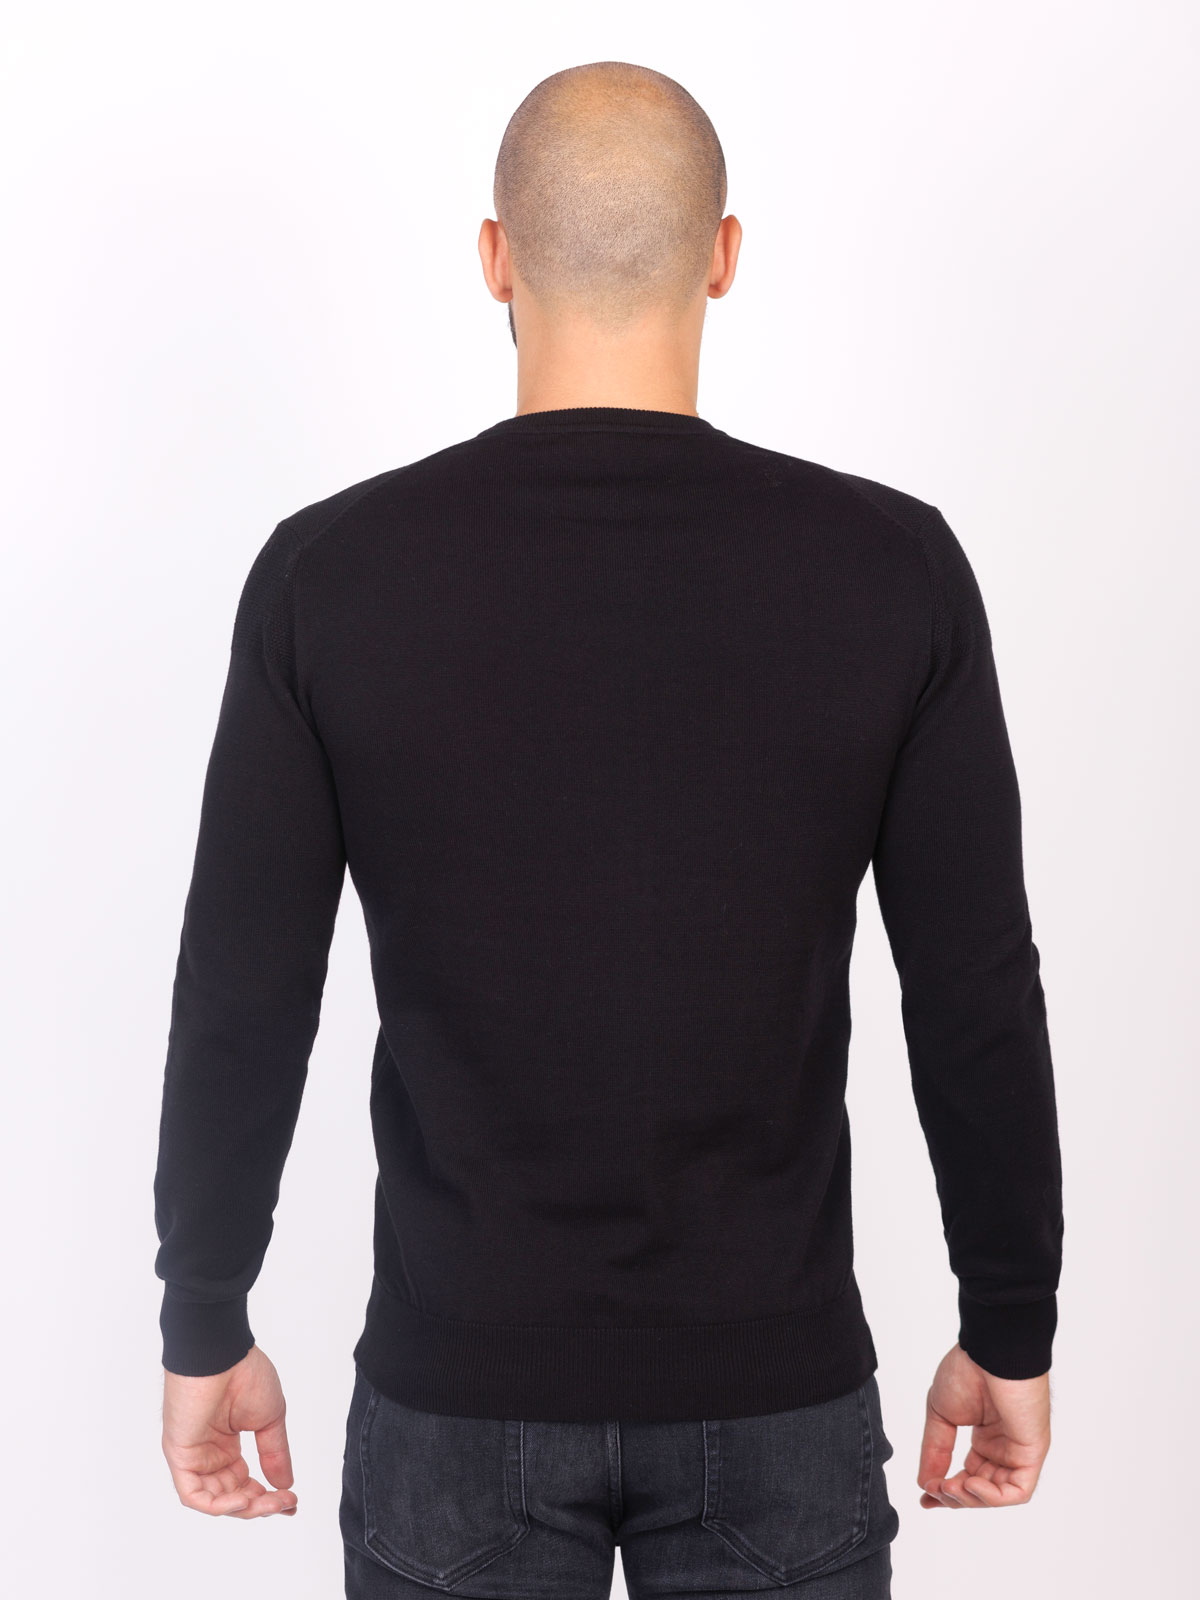 Mens blouse in black color - 35290 € 39.93 img2